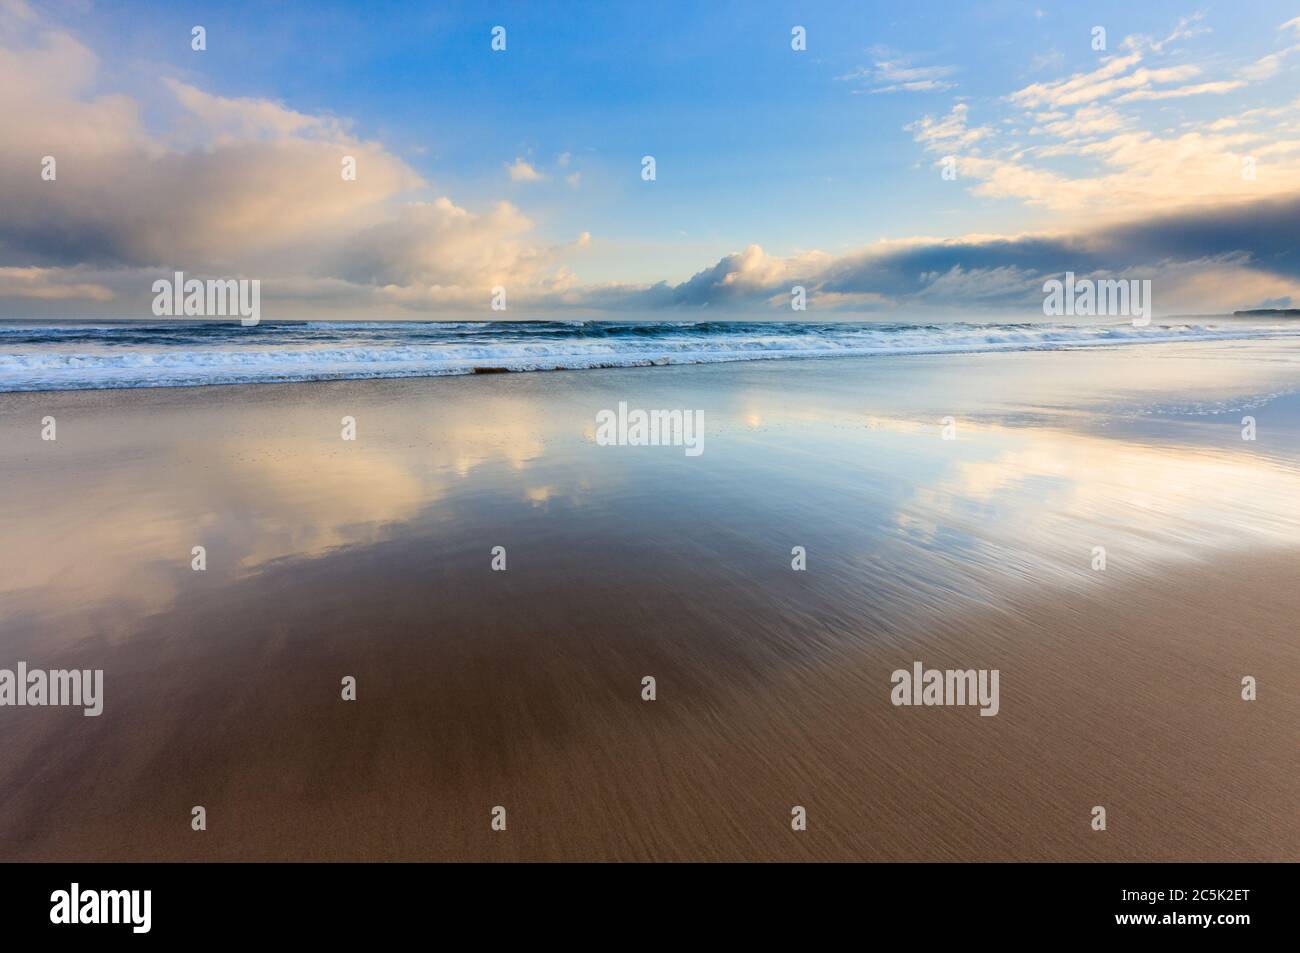 After the stormy sunrise on the coast the last of the threatening clouds begin to soften the light & create mirror like reflections on the beach sand. Stock Photo